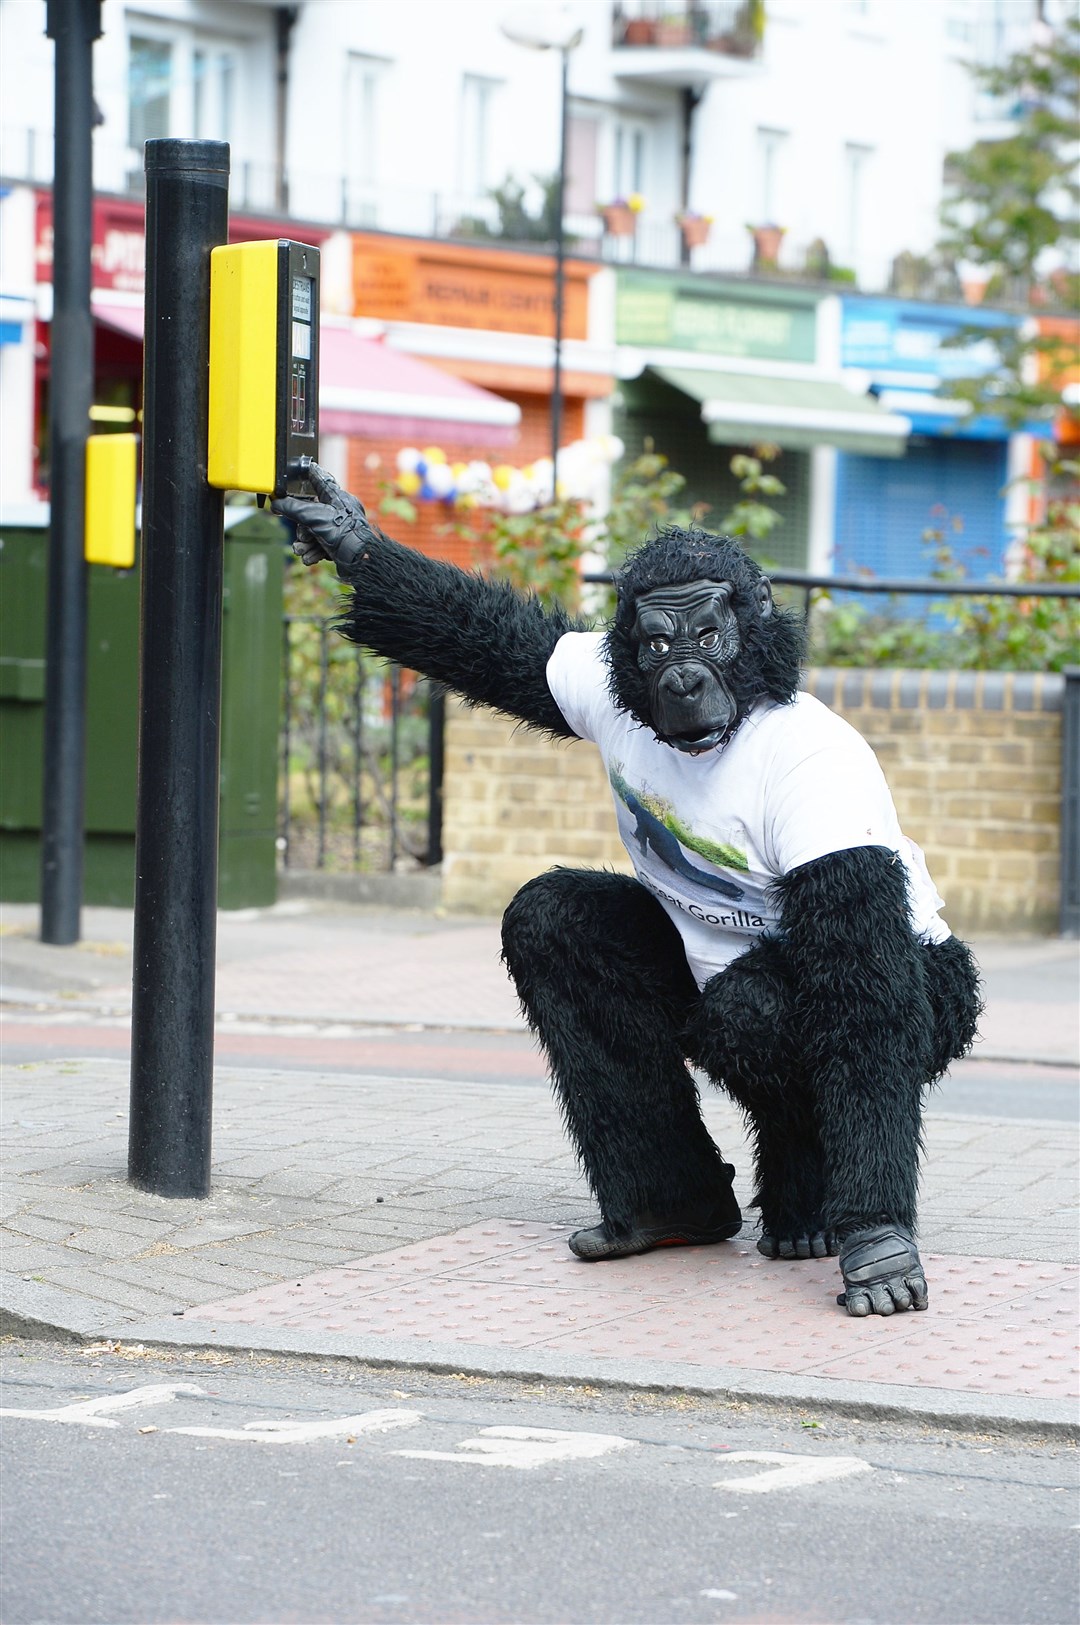 Tom Harrison used to be known as Mr Gorilla and would take on various challenges (John Stilwell/PA)